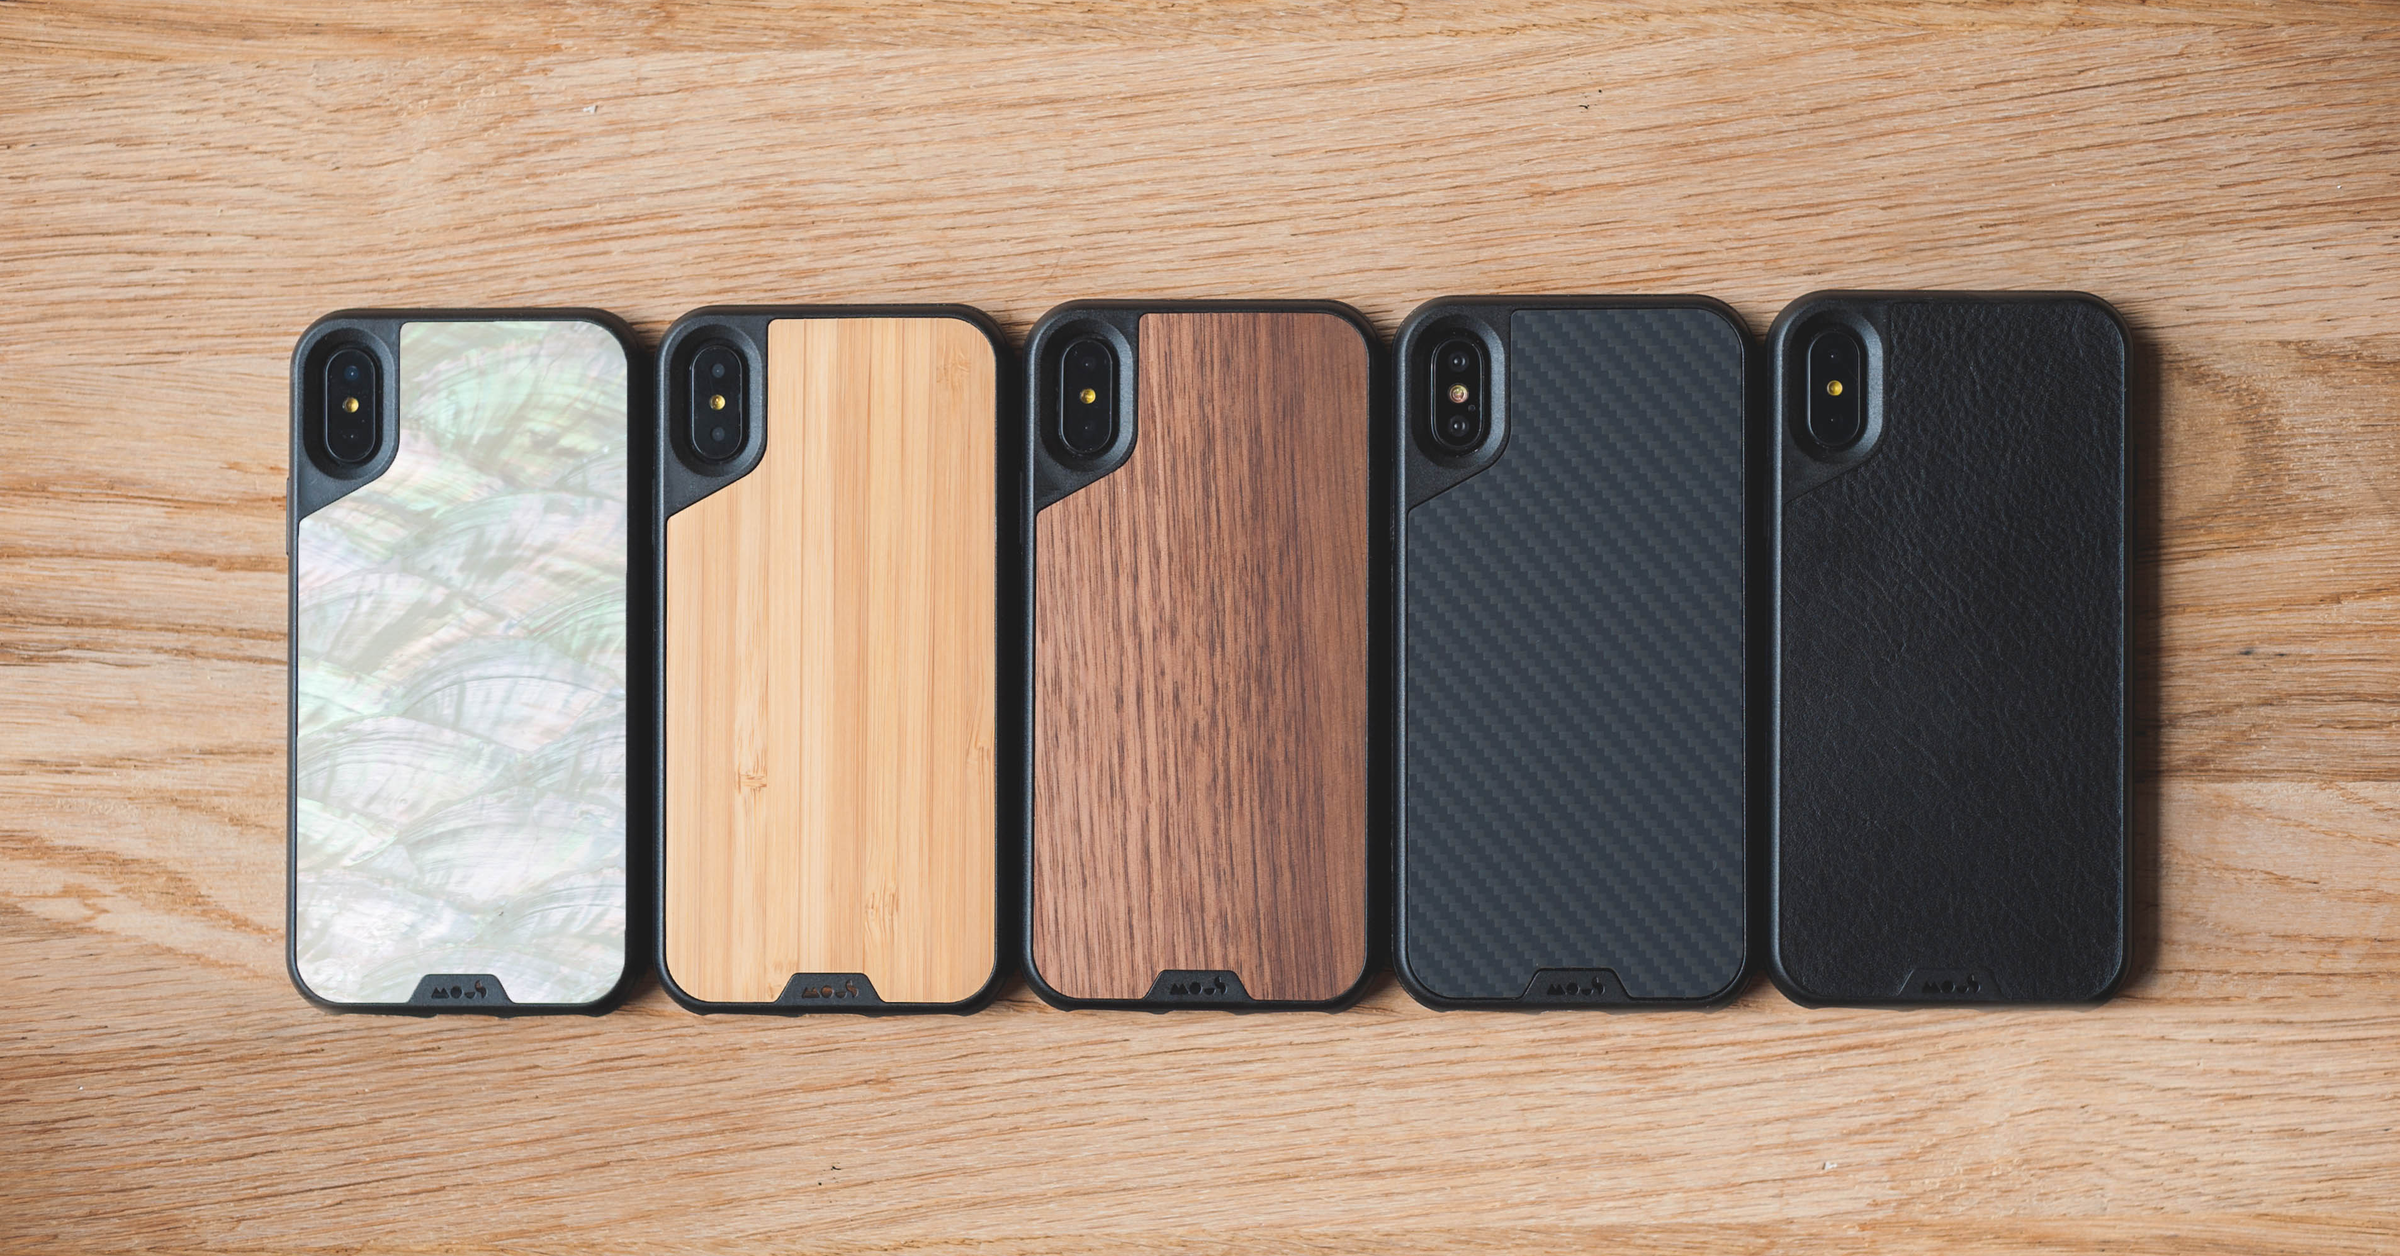 iPhone X, iPhone 6S, iPhone 6 Plus, iPhone XS, Apple iPhone 8, Limitless 2.0 Official Mous iPhone 8/7/6s/6 Case, , Screen Protectors, Mobile Phone Accessories, , mous case, Mobile phone case, Mobile phone, Gadget, Mobile phone accessories, Portable communications device, Communication Device, Wood, Smartphone, Iphone, Brown